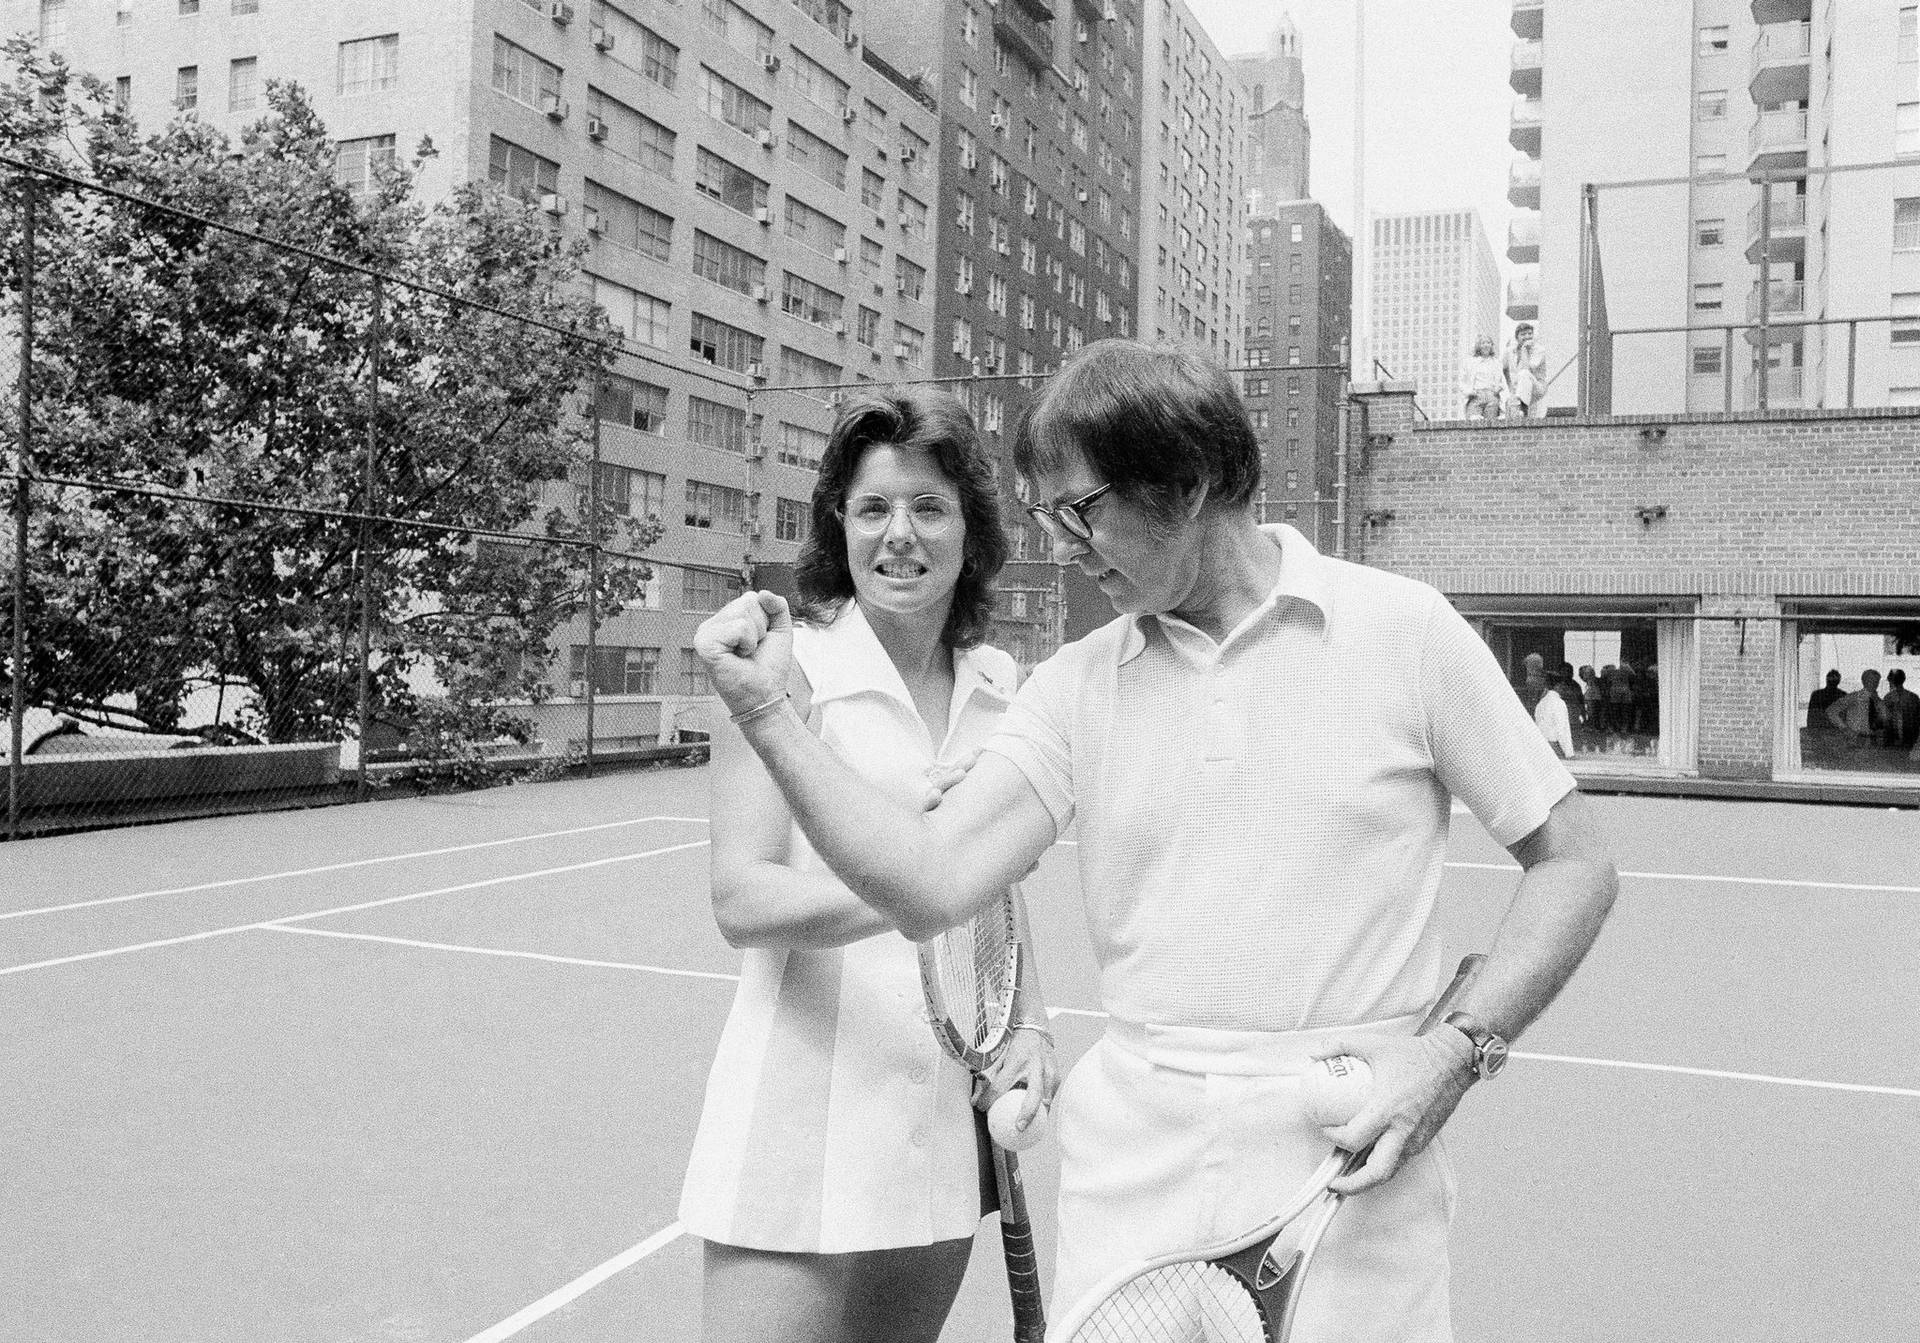 Bobby Riggs in action during the iconic 'Battle of the Sexes' tennis match. Wallpaper